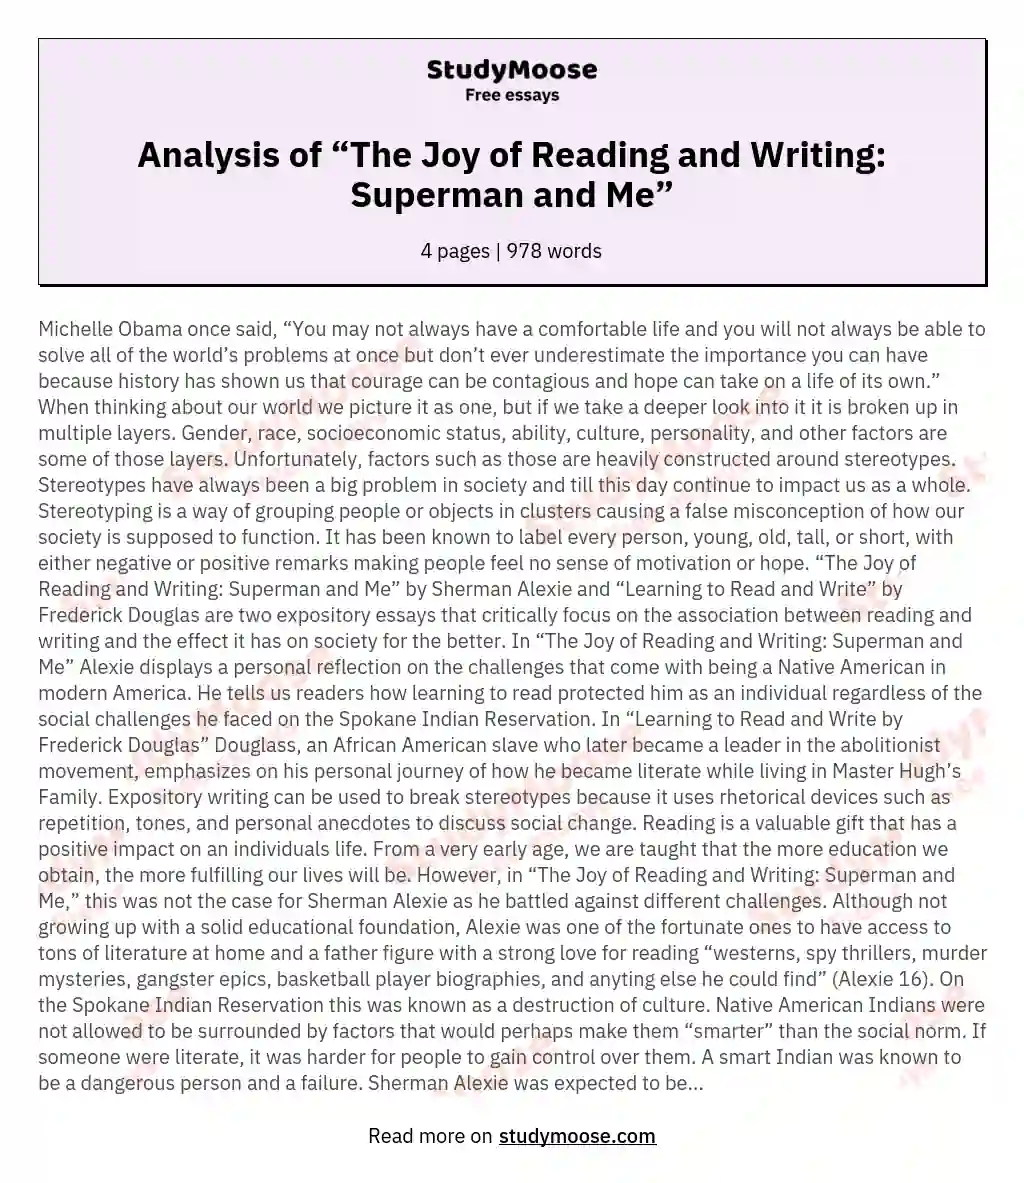 Analysis of “The Joy of Reading and Writing: Superman and Me”